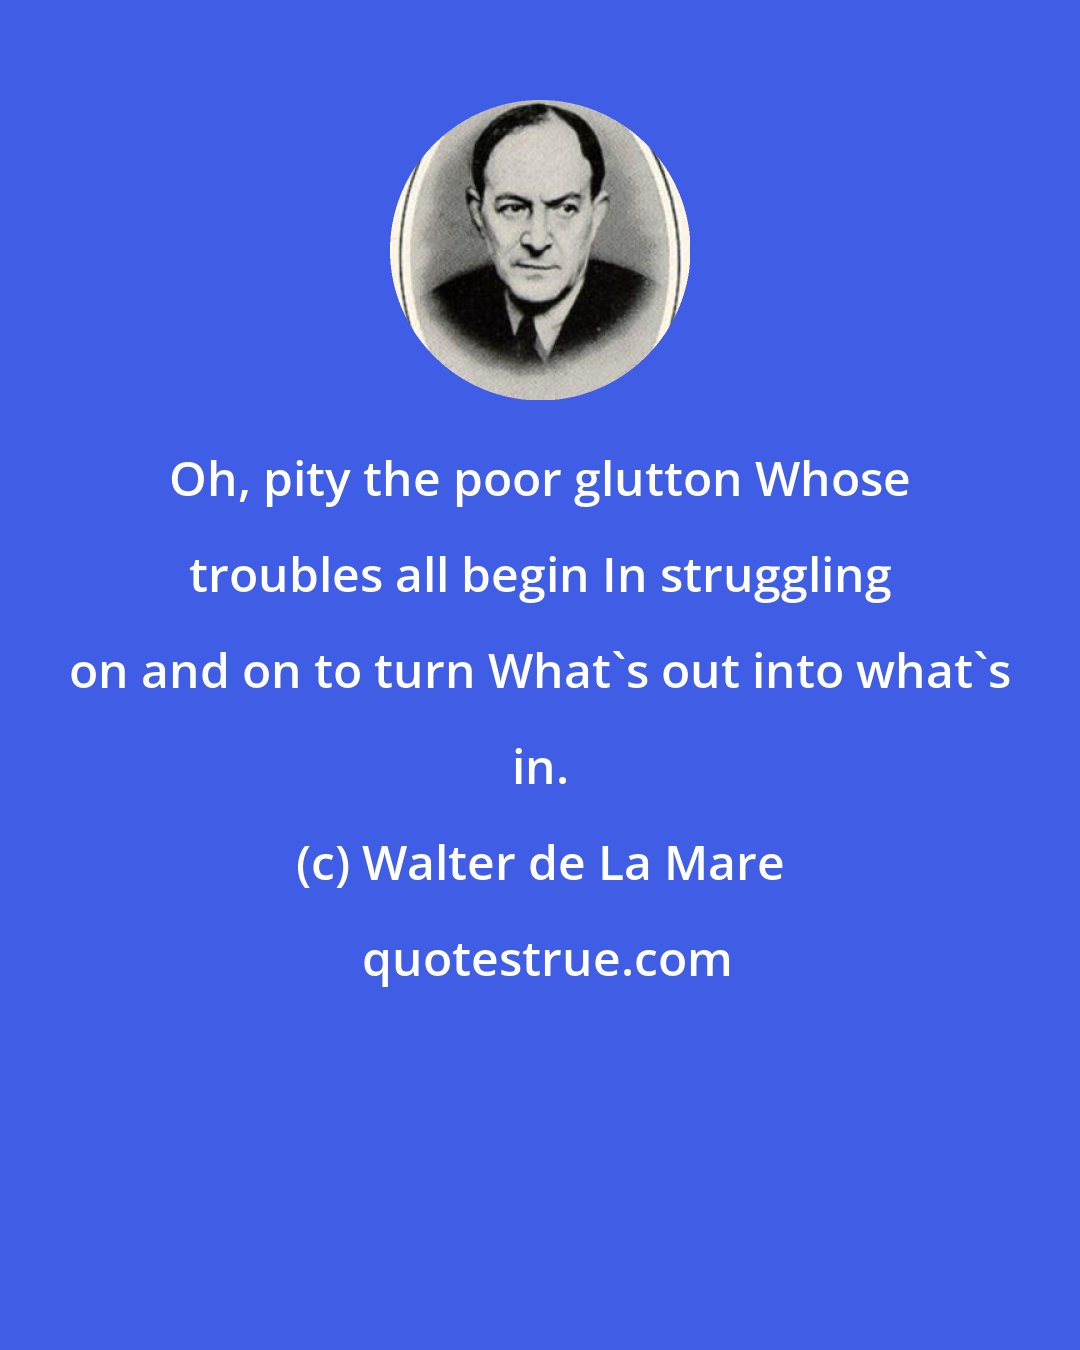 Walter de La Mare: Oh, pity the poor glutton Whose troubles all begin In struggling on and on to turn What's out into what's in.